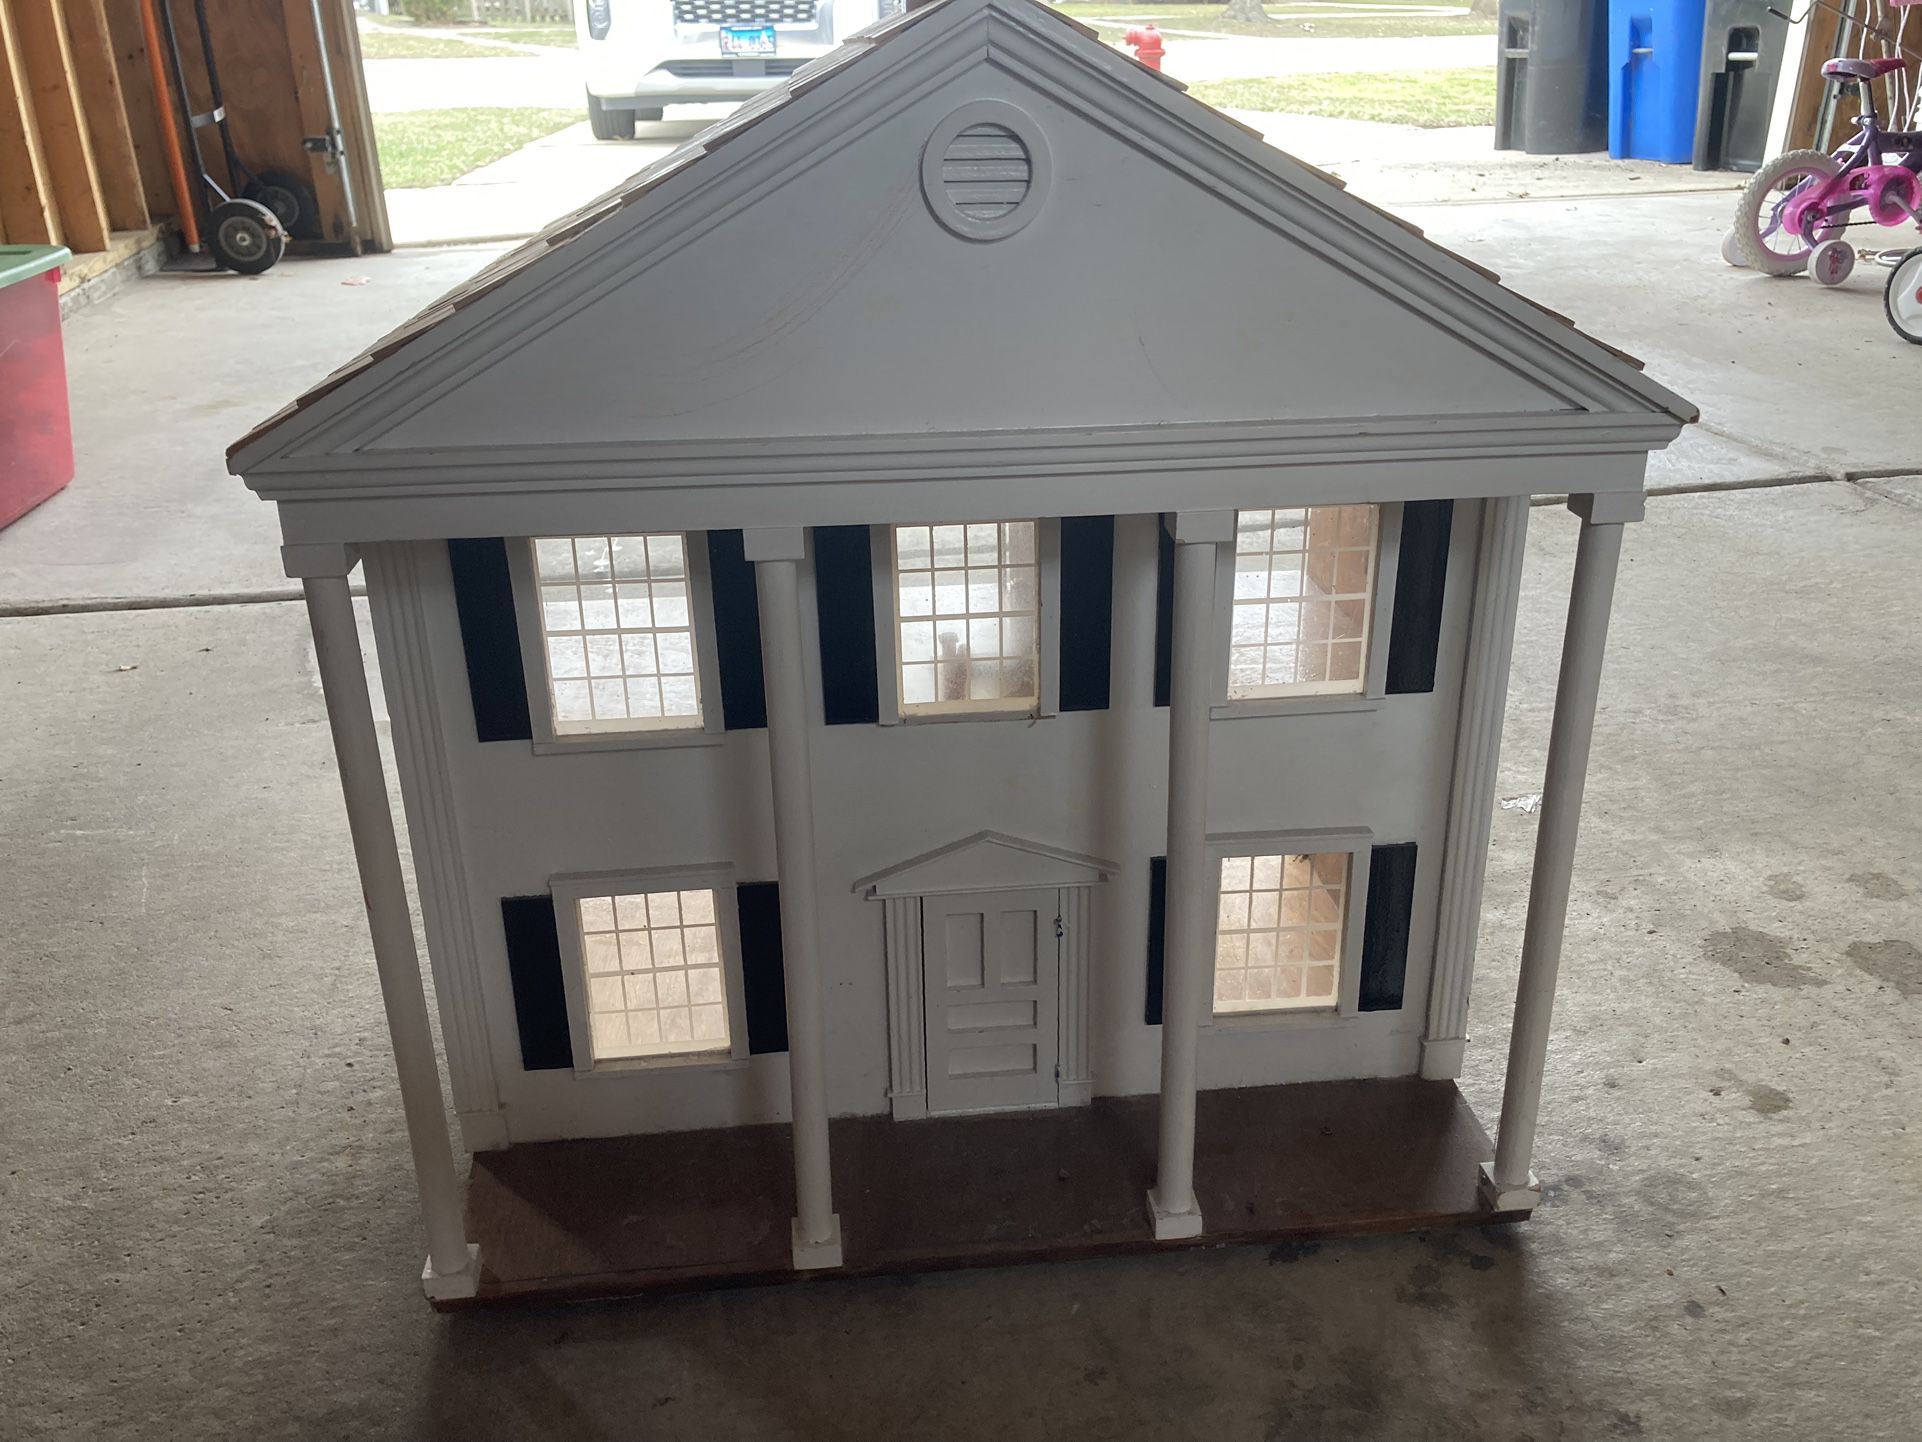 Barbie Dream House Doll house 3-Story With Furniture, Dolls And Accessories  100+ for Sale in Chicago, IL - OfferUp